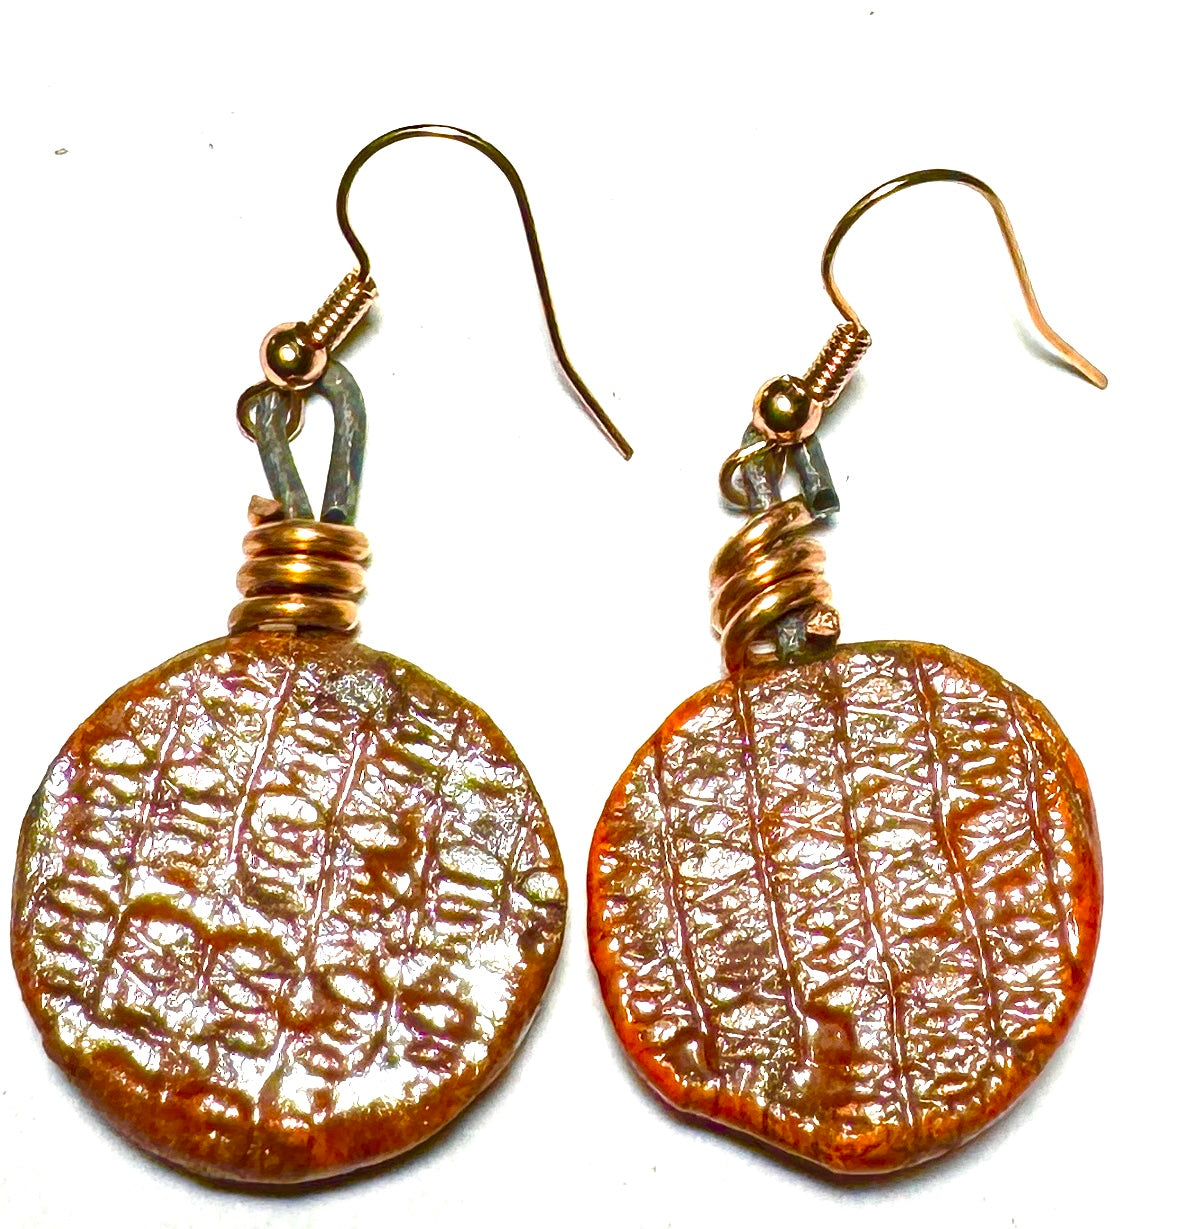 Raku Fired Earrings Shimmery Copper Luster Glazed on both sides 1/2 ounce The Raku Fired Earrings have a unique copper luster glaze that adds a special touch to any outfit. They come in a convenient 1/2 ounce pack, so you can easily take them on the go.